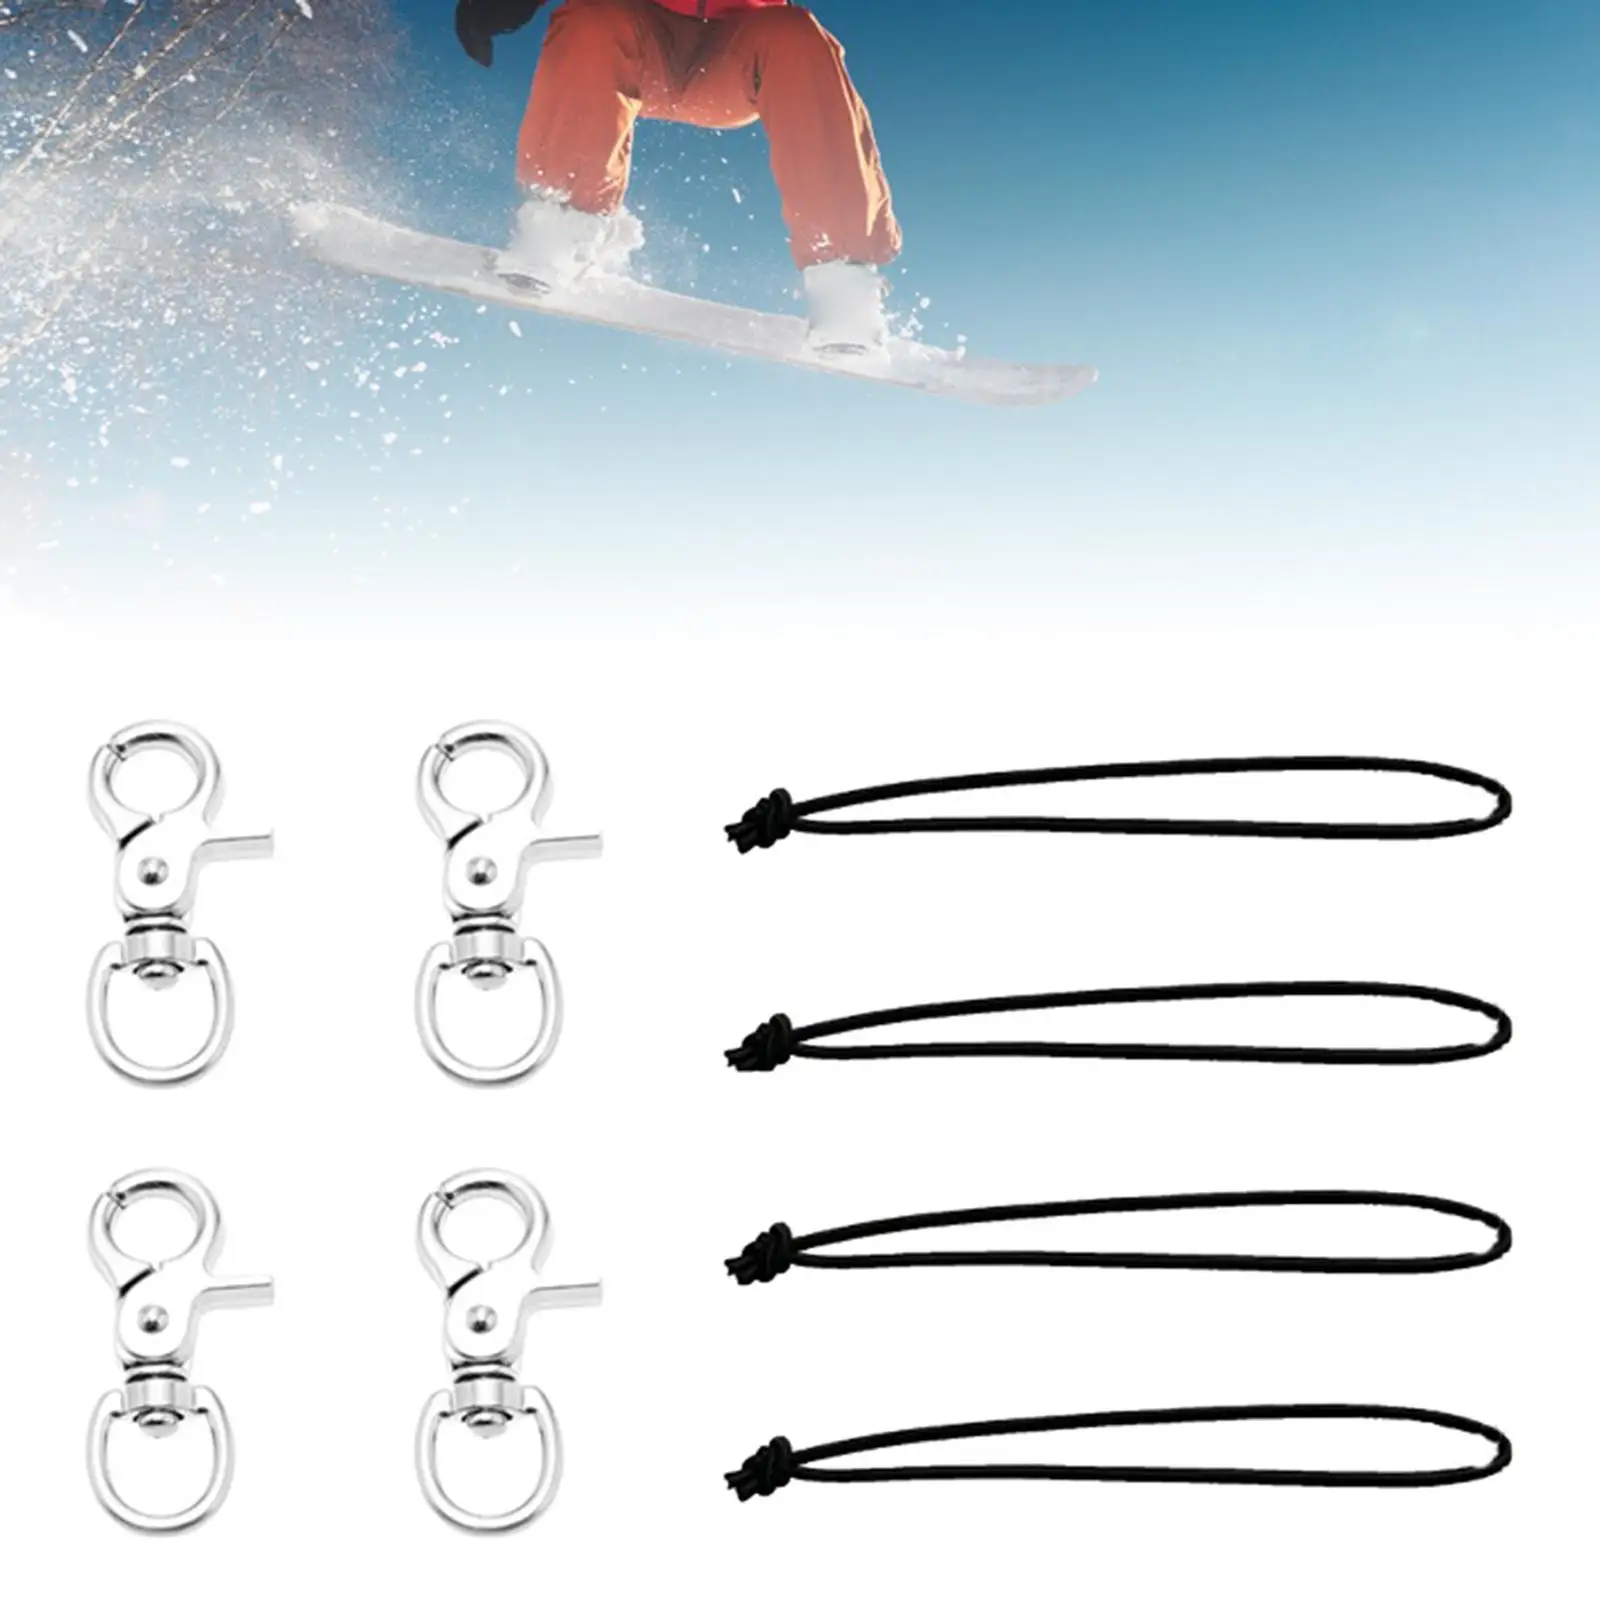 4 Pieces Snowboard Leash Cord Window Curtain Multifunctional Connecting Rope